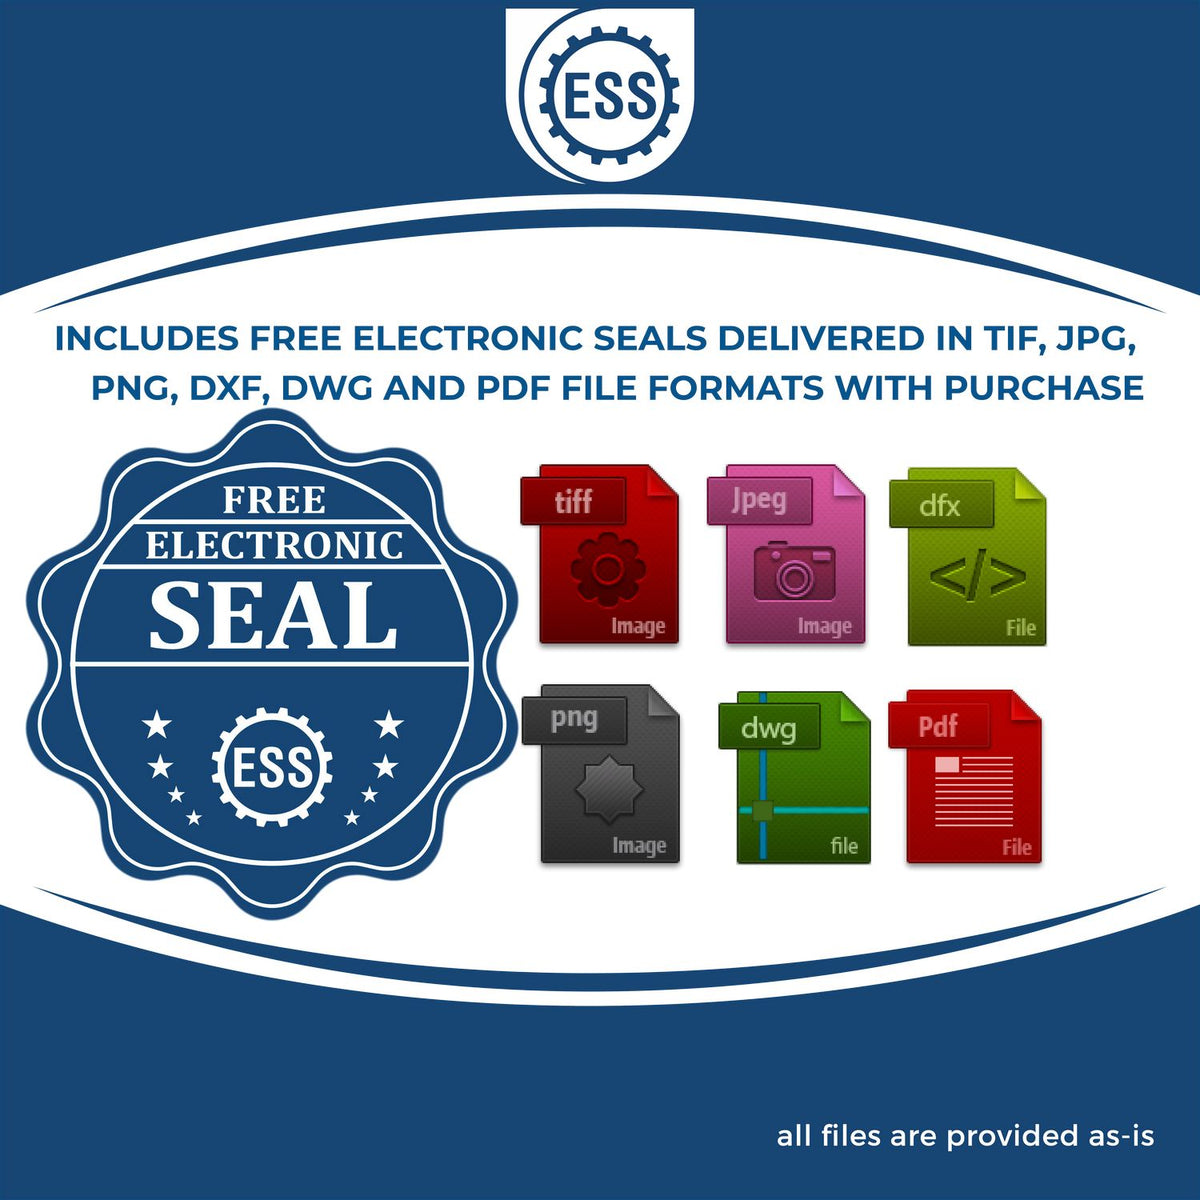 An infographic for the free electronic seal for the Heavy Duty Cast Iron Arizona Geologist Seal Embosser illustrating the different file type icons such as DXF, DWG, TIF, JPG and PNG.